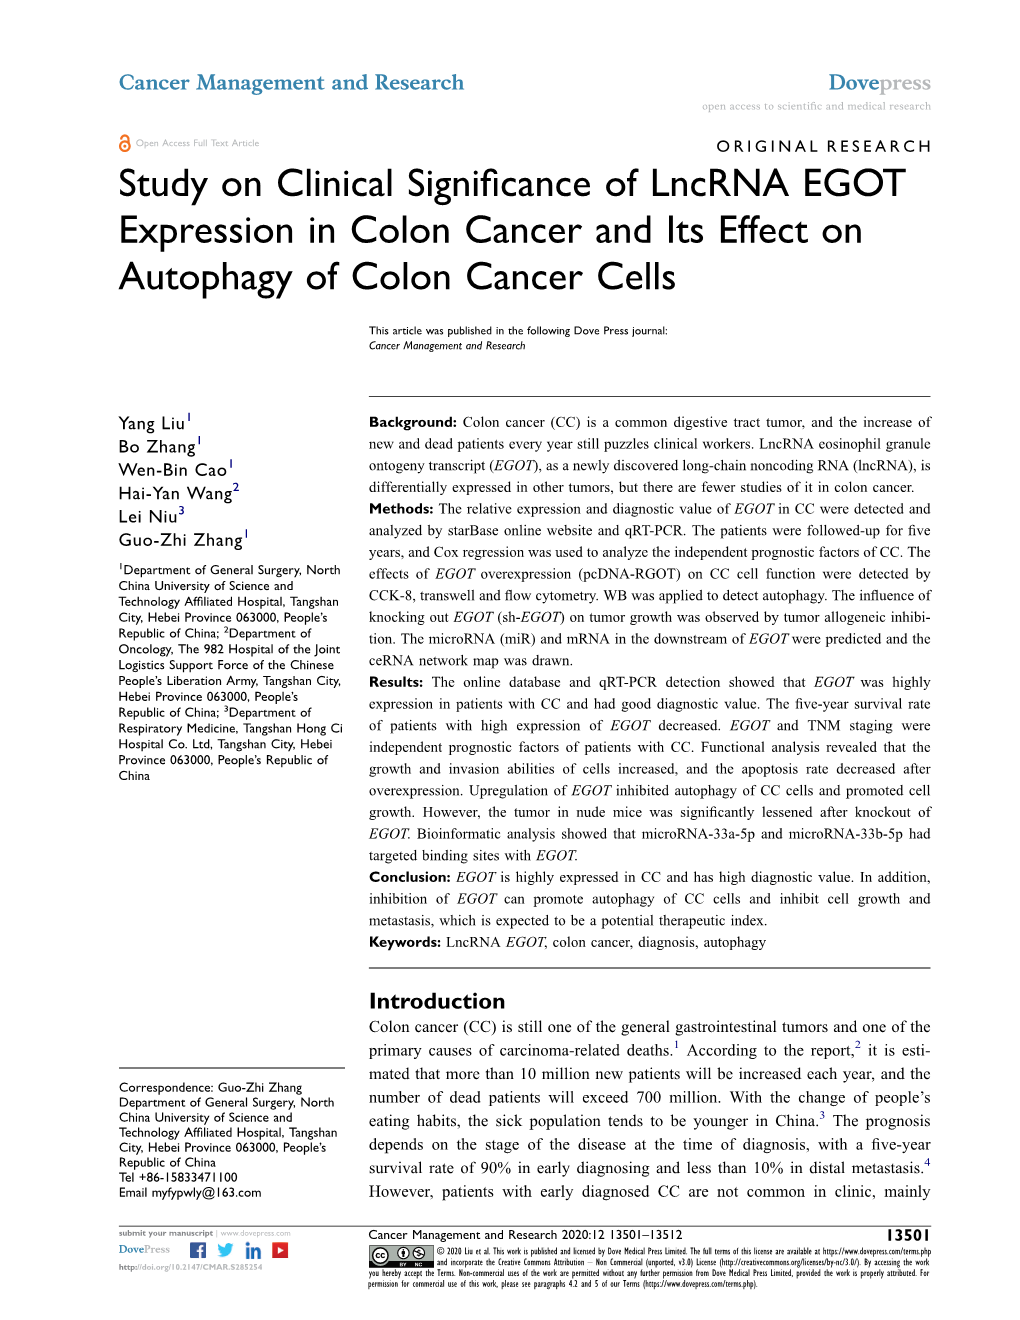 Study on Clinical Significance of Lncrna EGOT Expression in Colon Cancer and Its Effect on Autophagy of Colon Cancer Cells